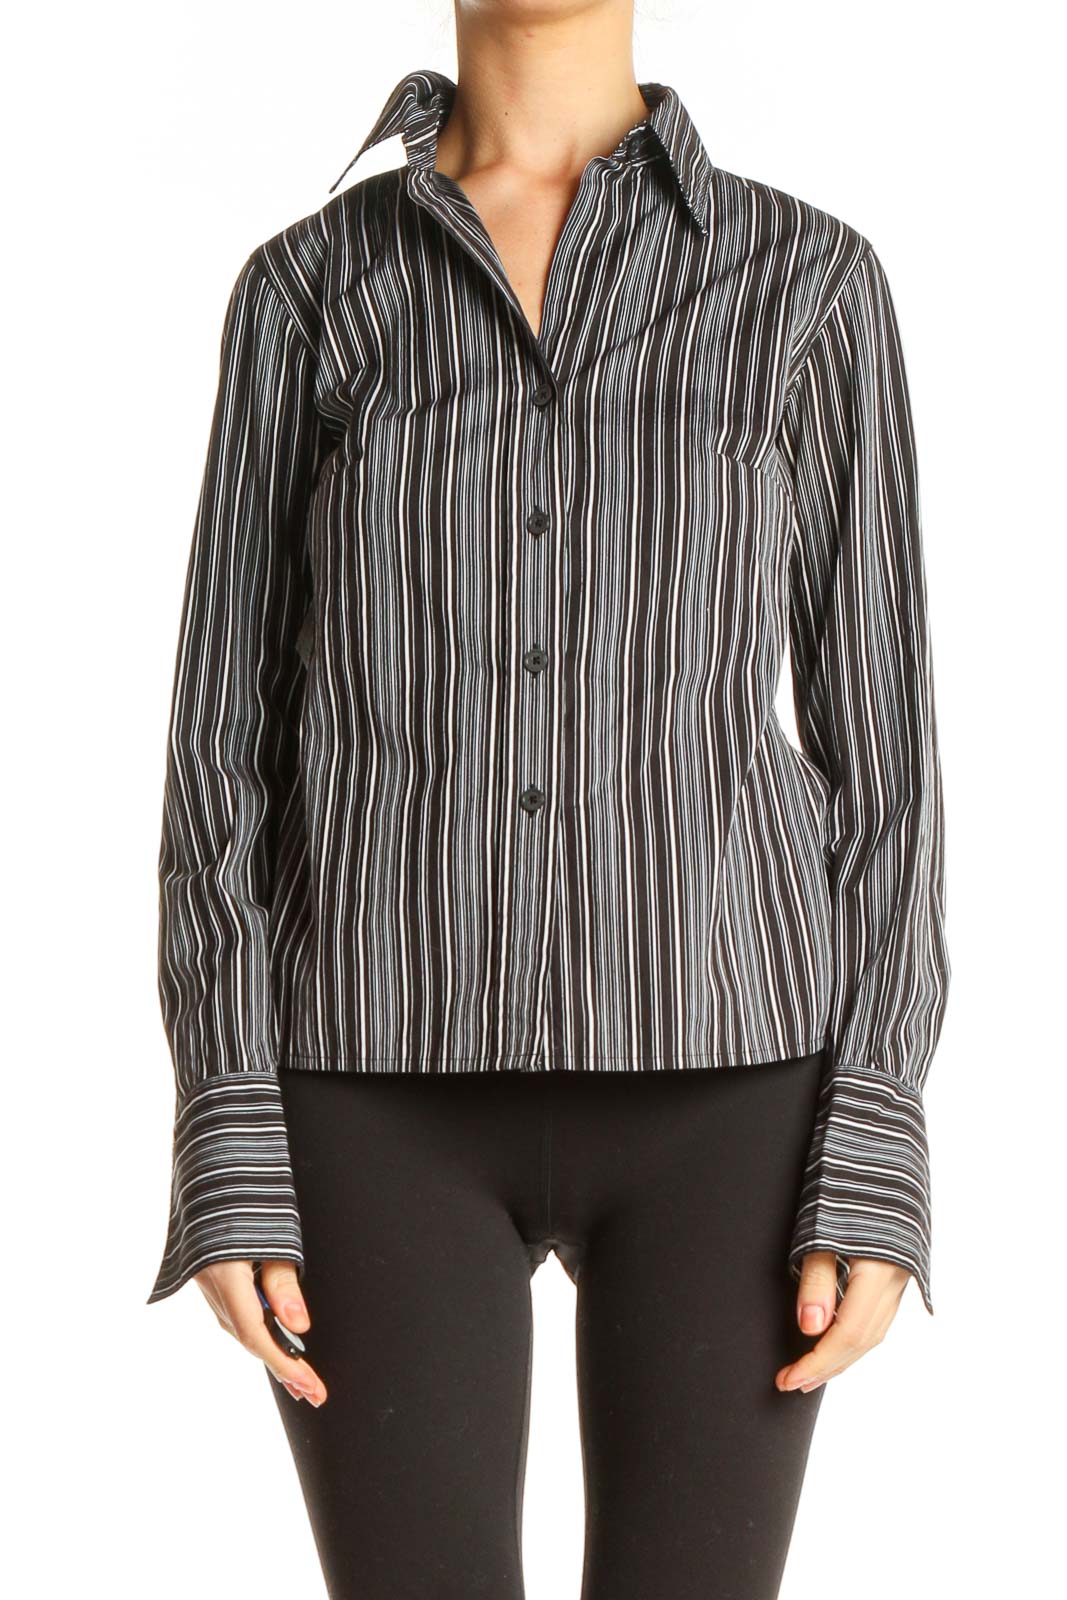 Black Striped Casual Shirt Front